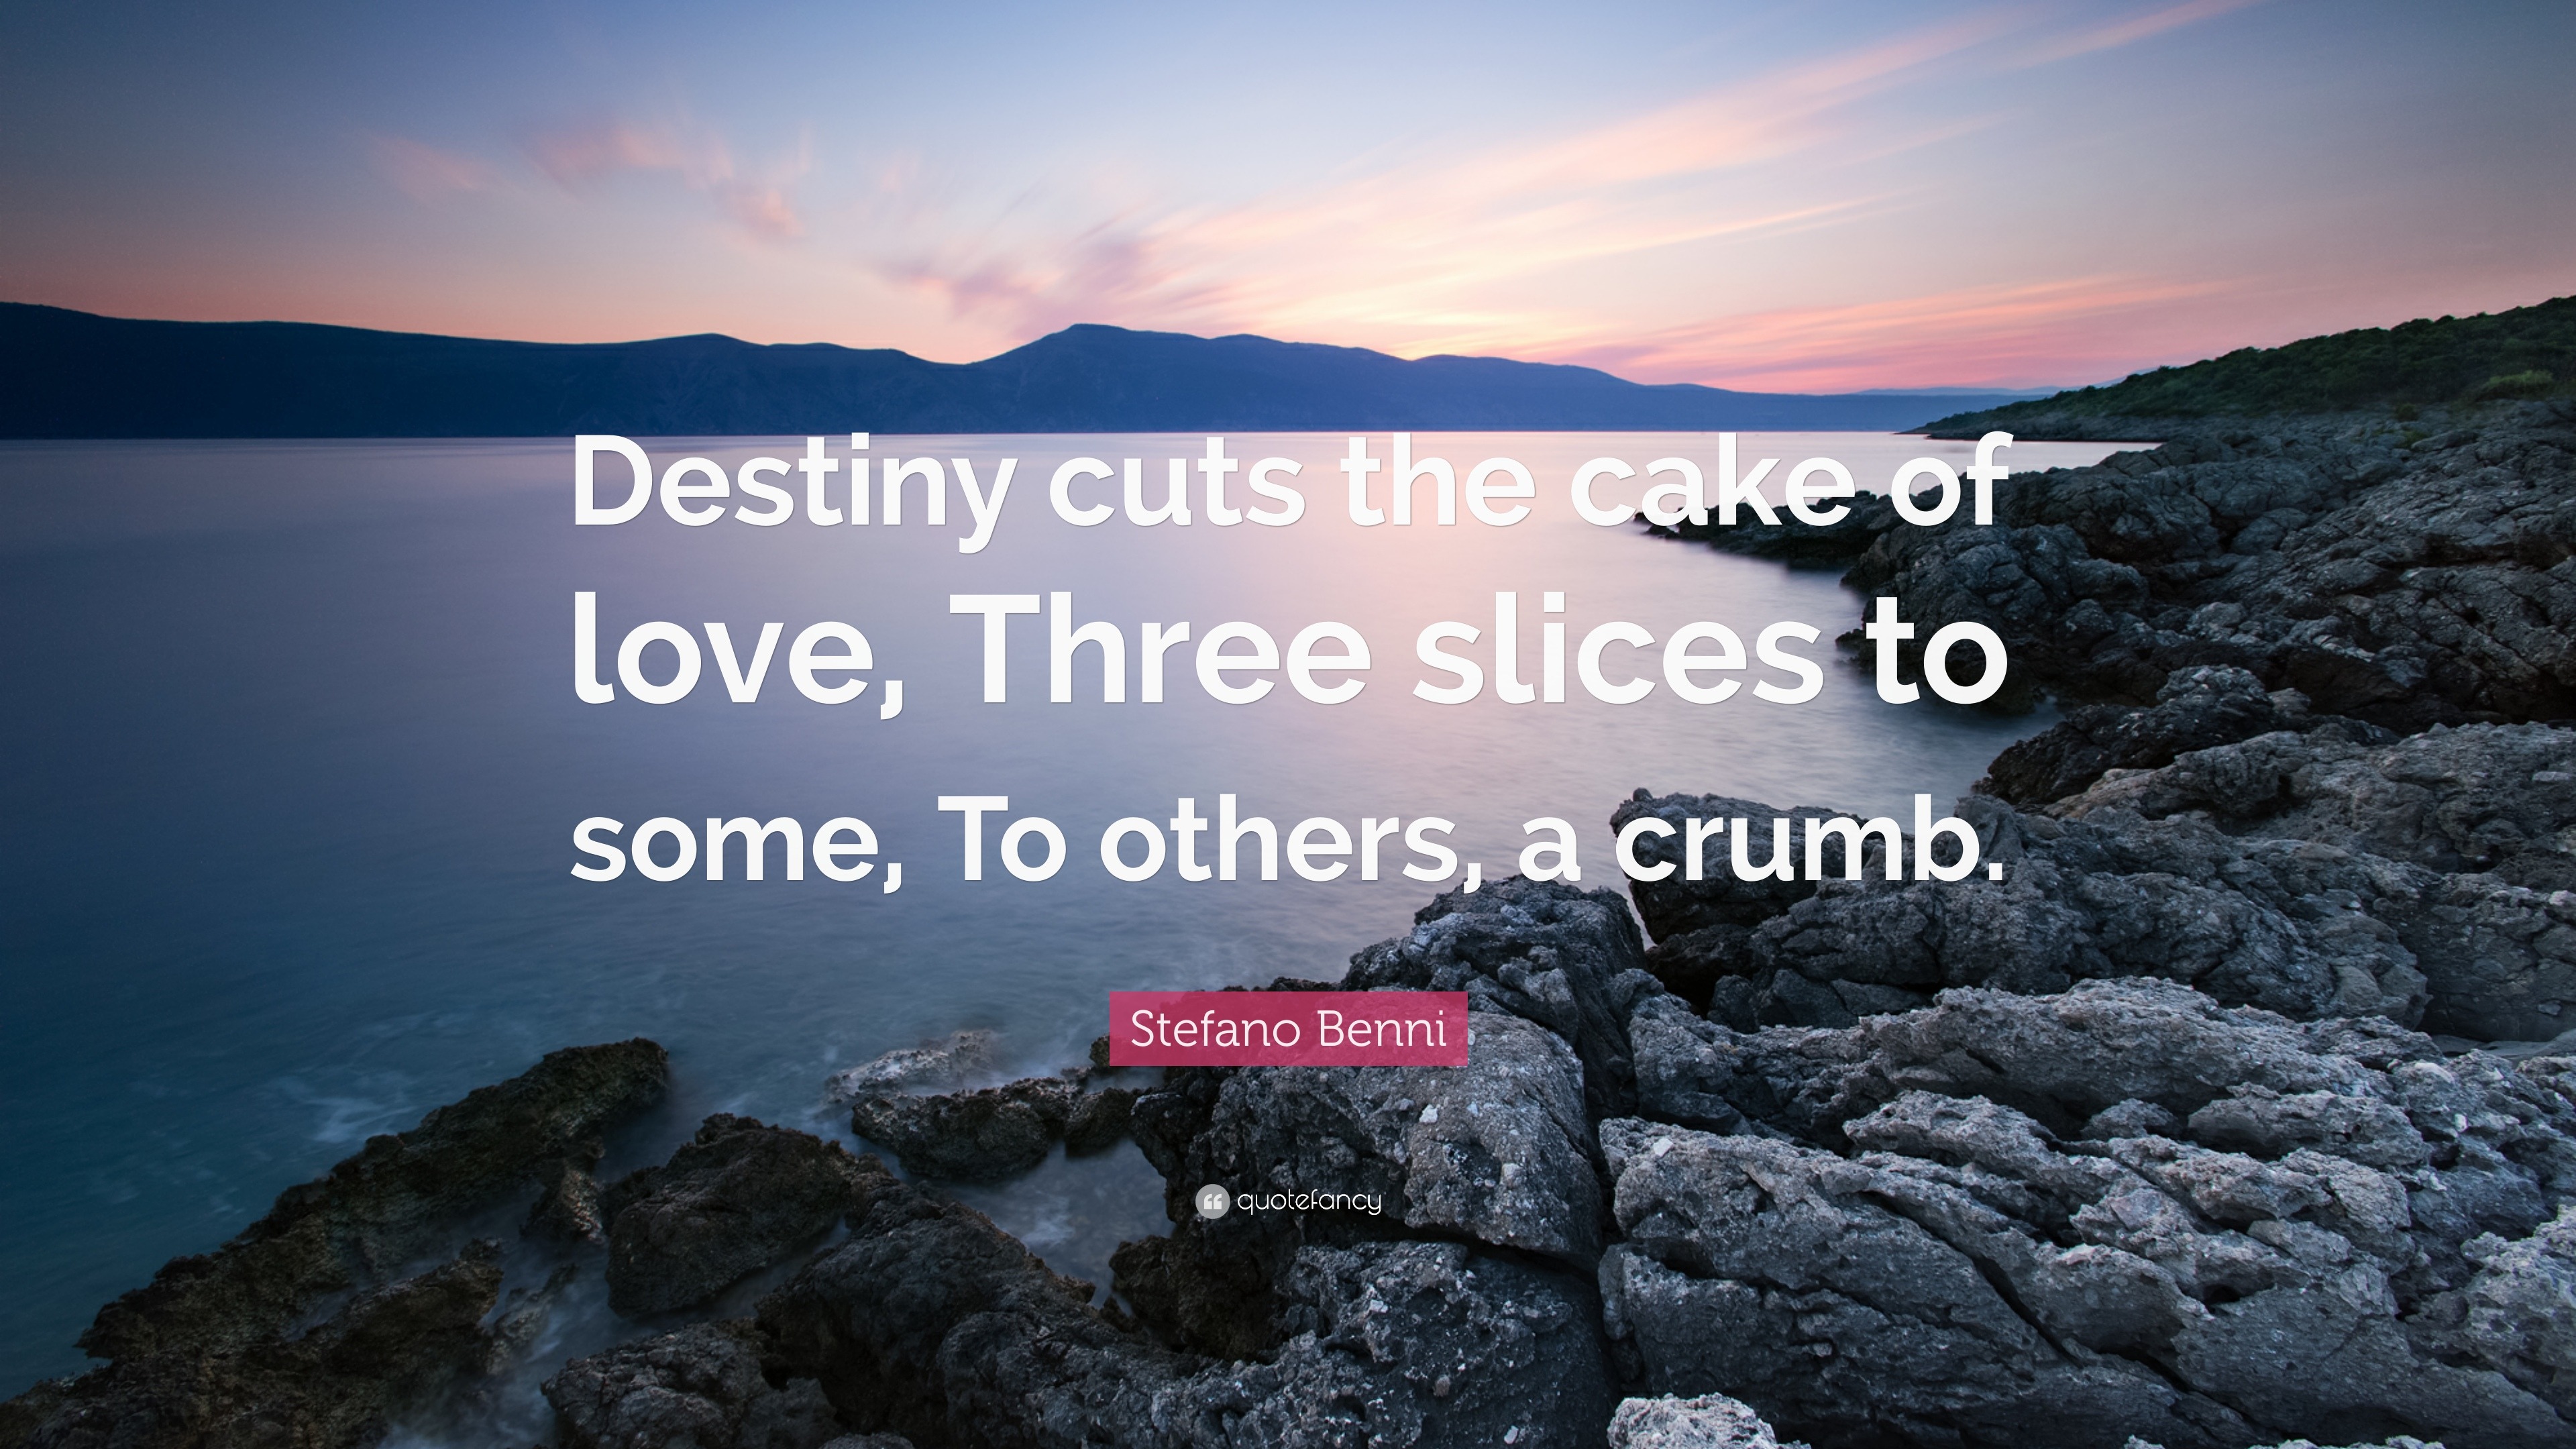 destiny love quotes and sayings